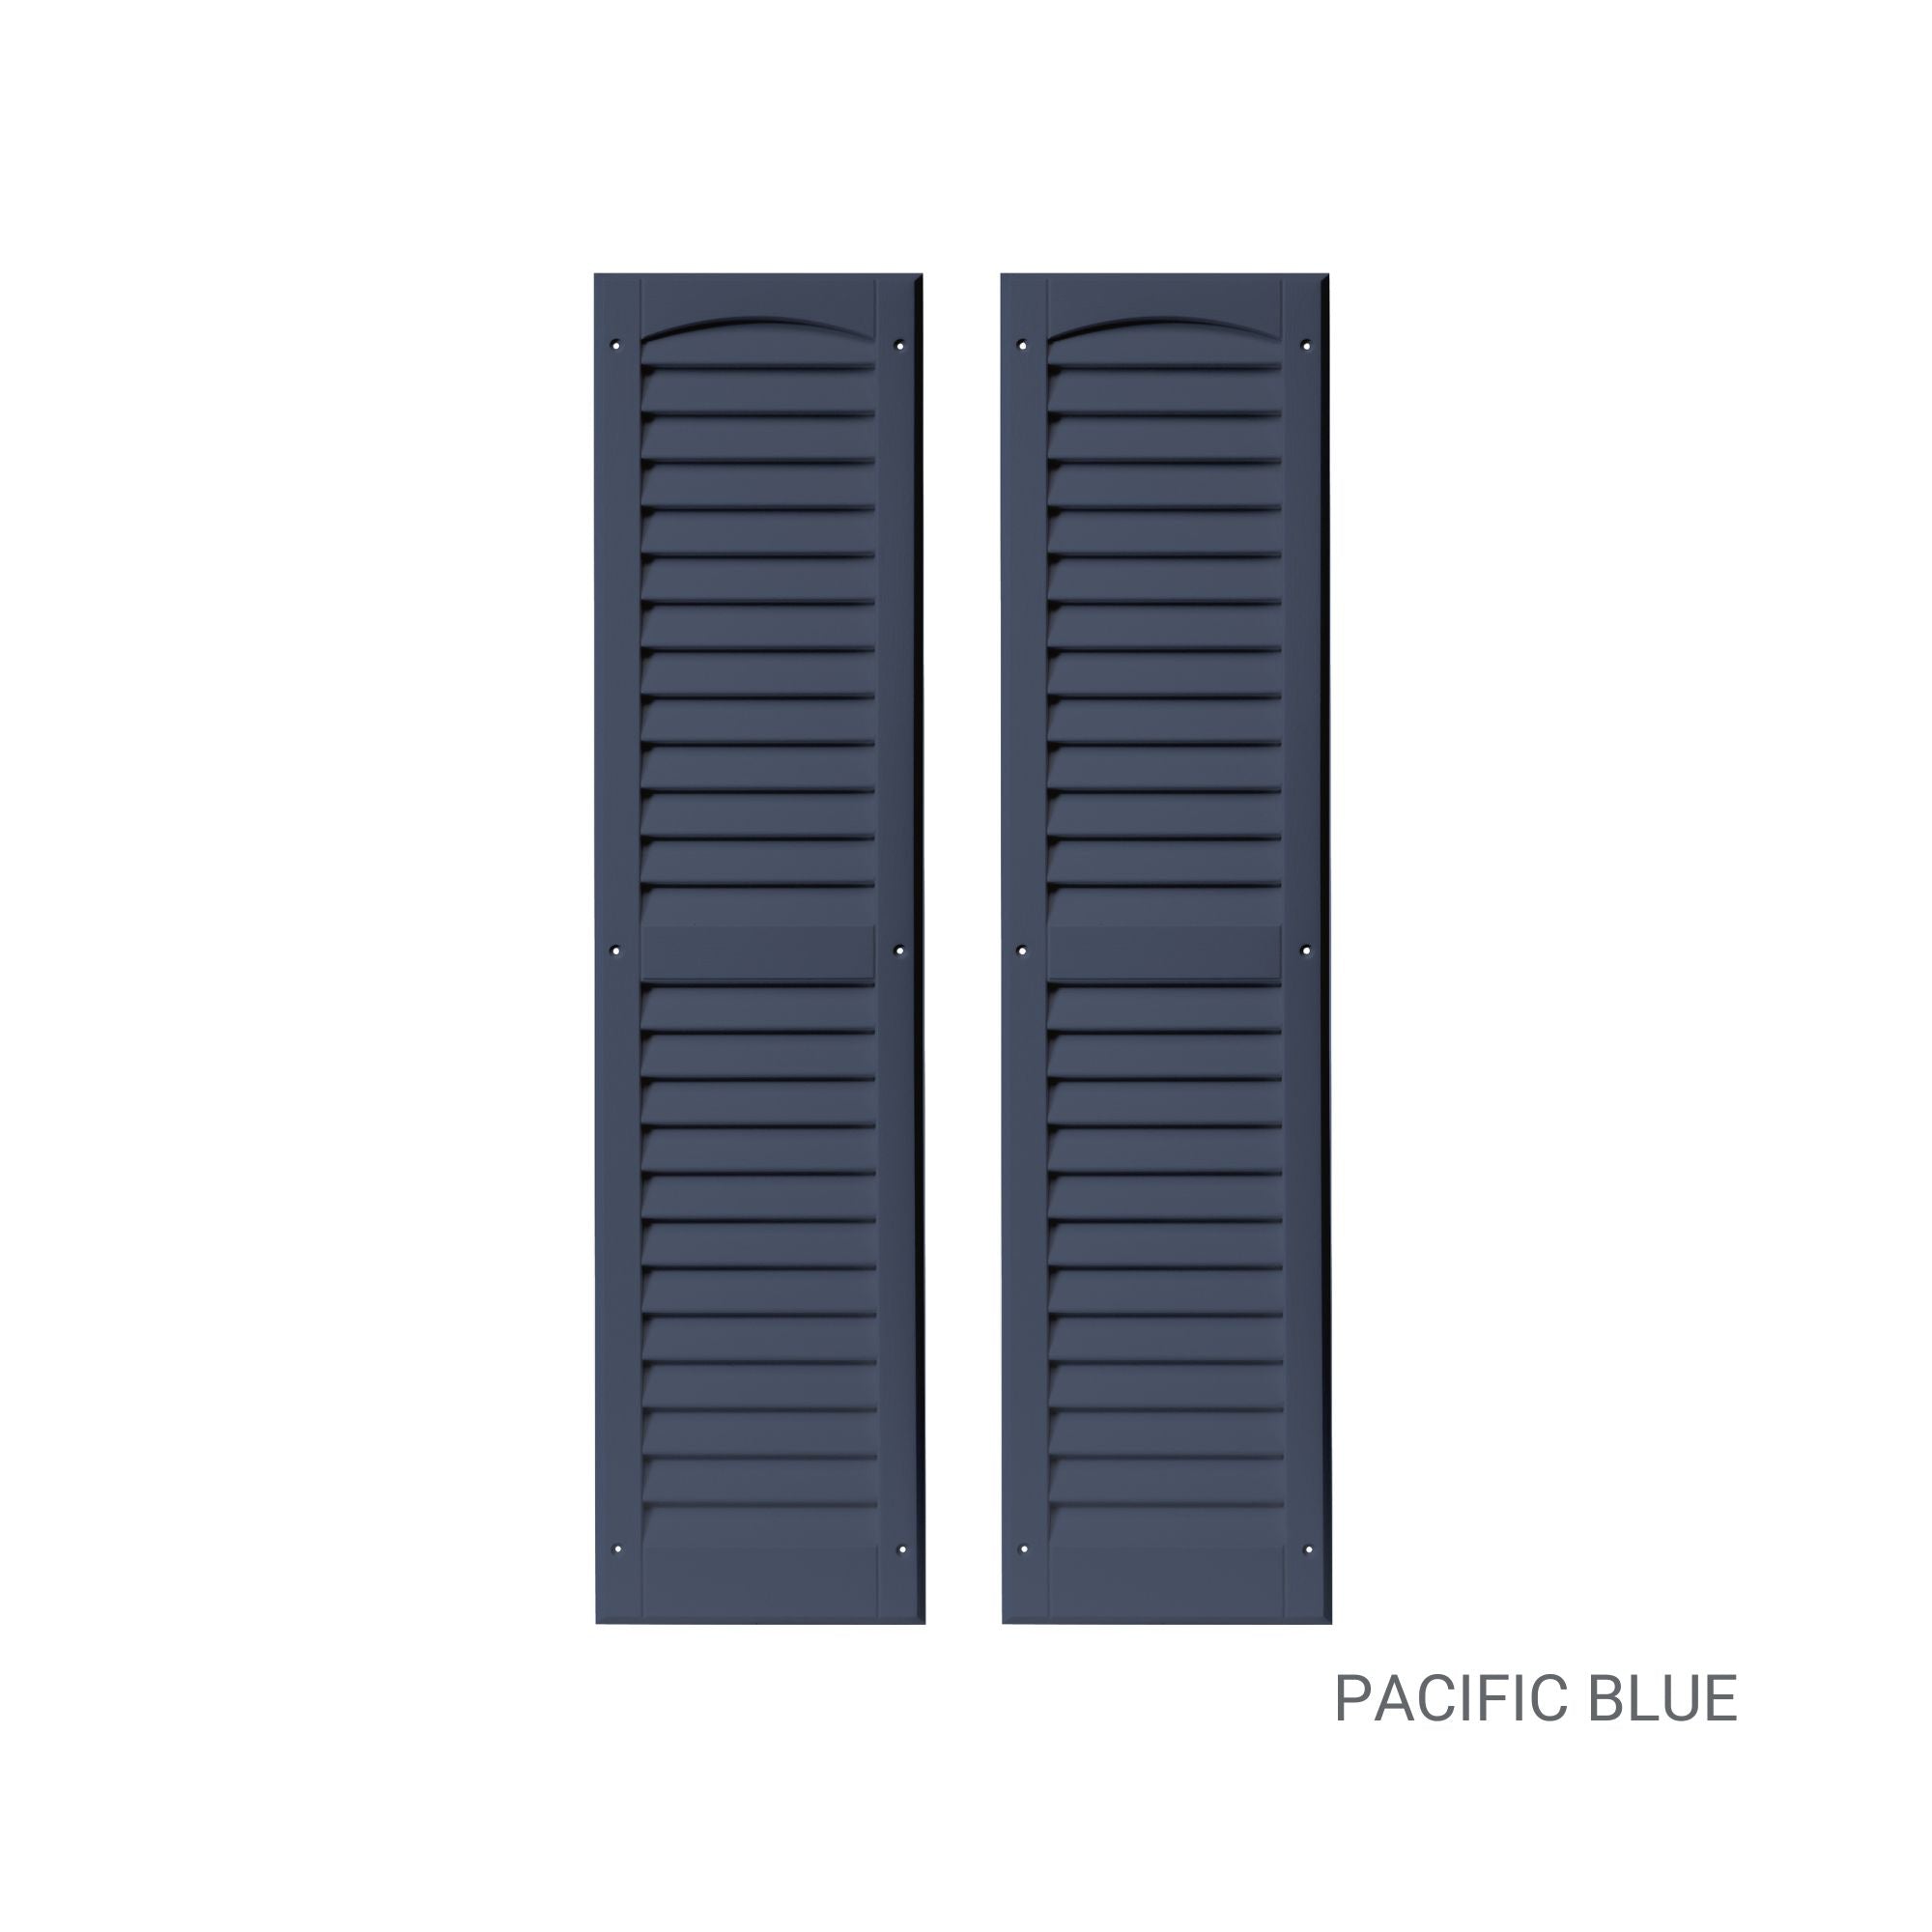 Pair of 9" W x 36" H Louvered Pacific Blue Shutters for Sheds, Playhouses, and MORE